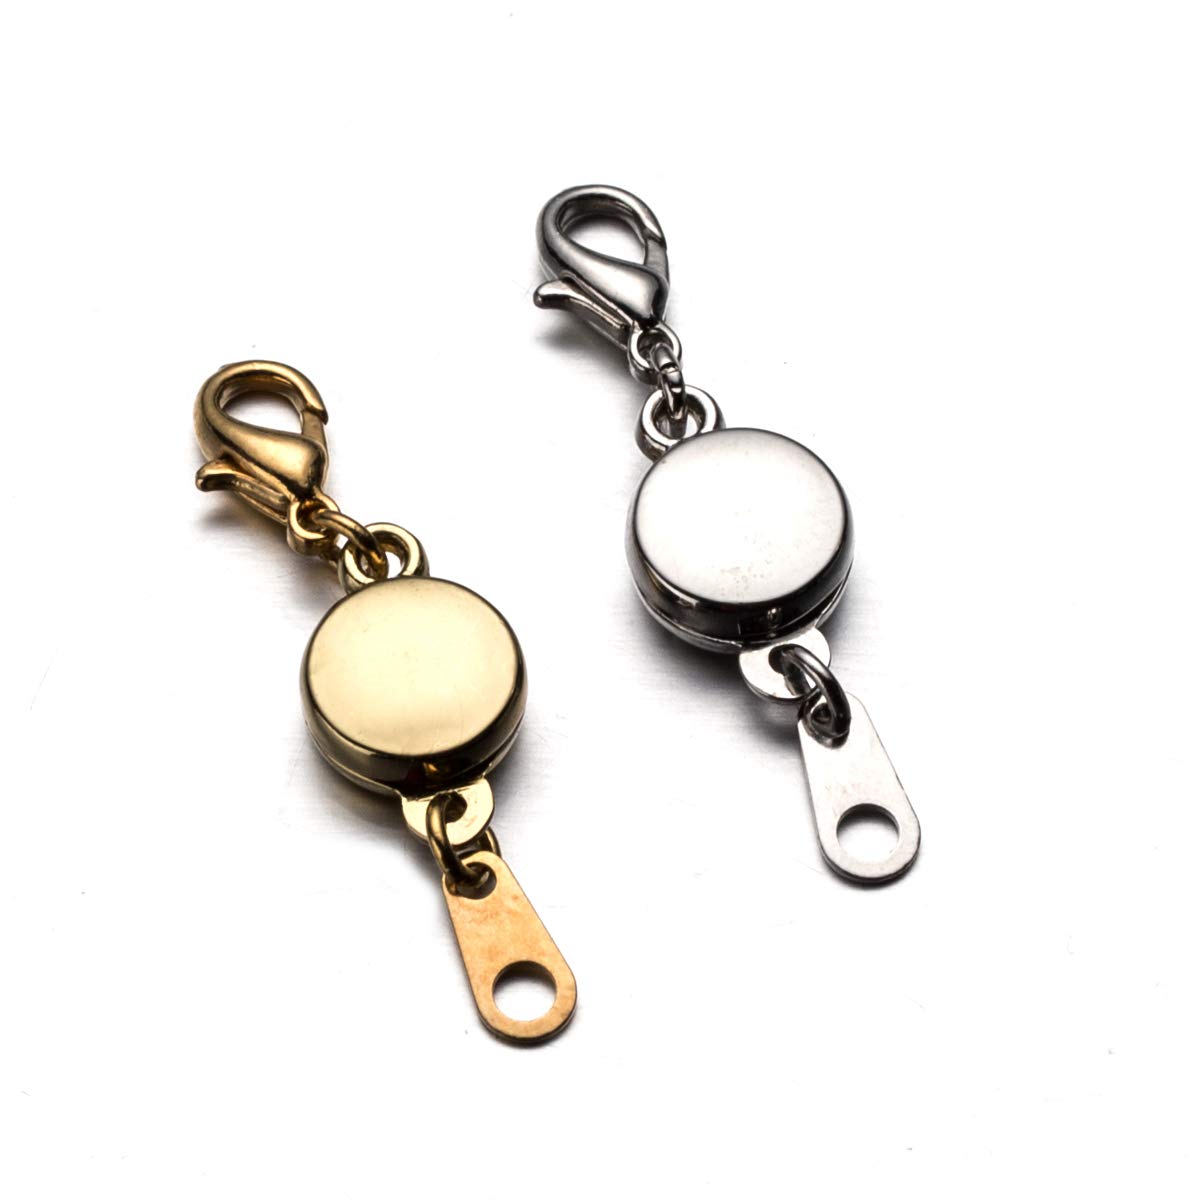  Zpsolution Screw-in Locking Magnetic Jewelry Clasps for  Necklaces 6mm Light and Small Keep The Clasp in Back